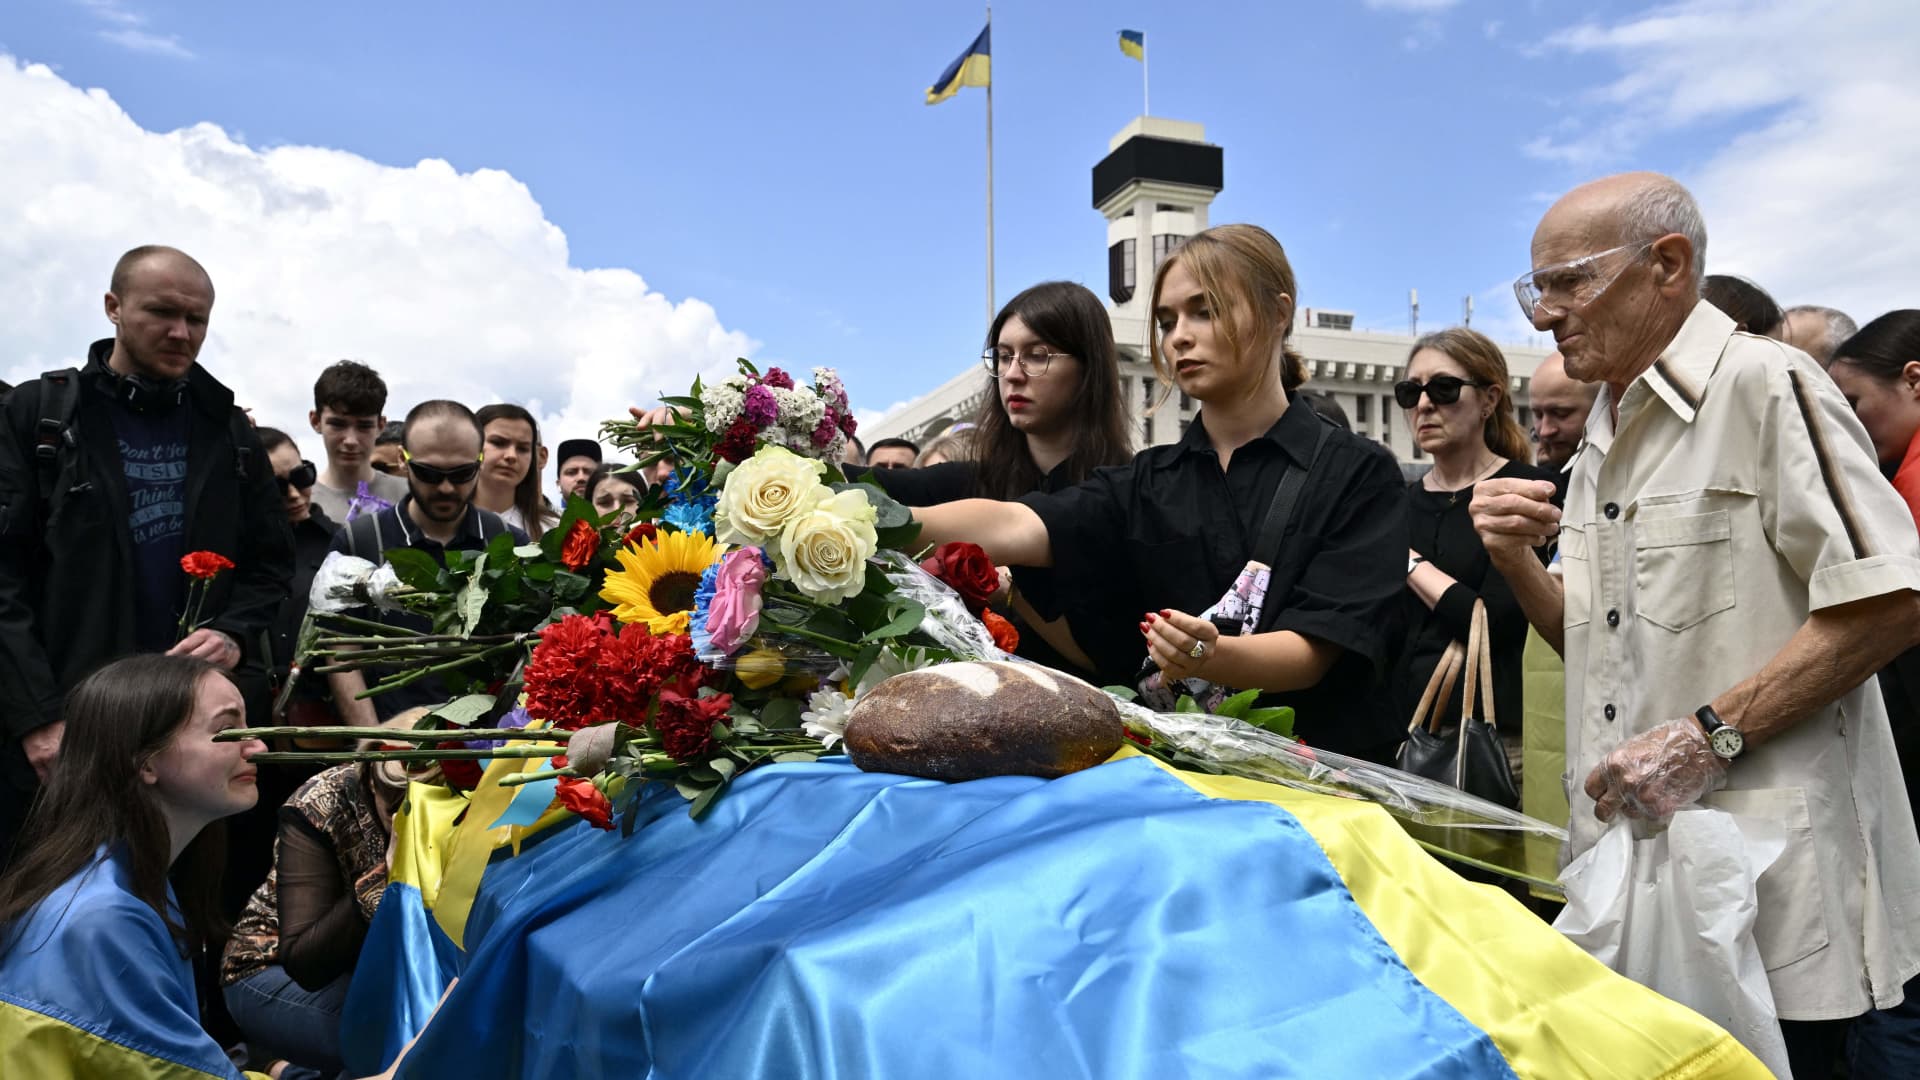 Mourners pay their respects next to the coffin of killed Ukrainian serviceman Roman Ratushny during a farewell ceremony in Kyiv on June 18, 2022, amid the Russian invasion of Ukraine.